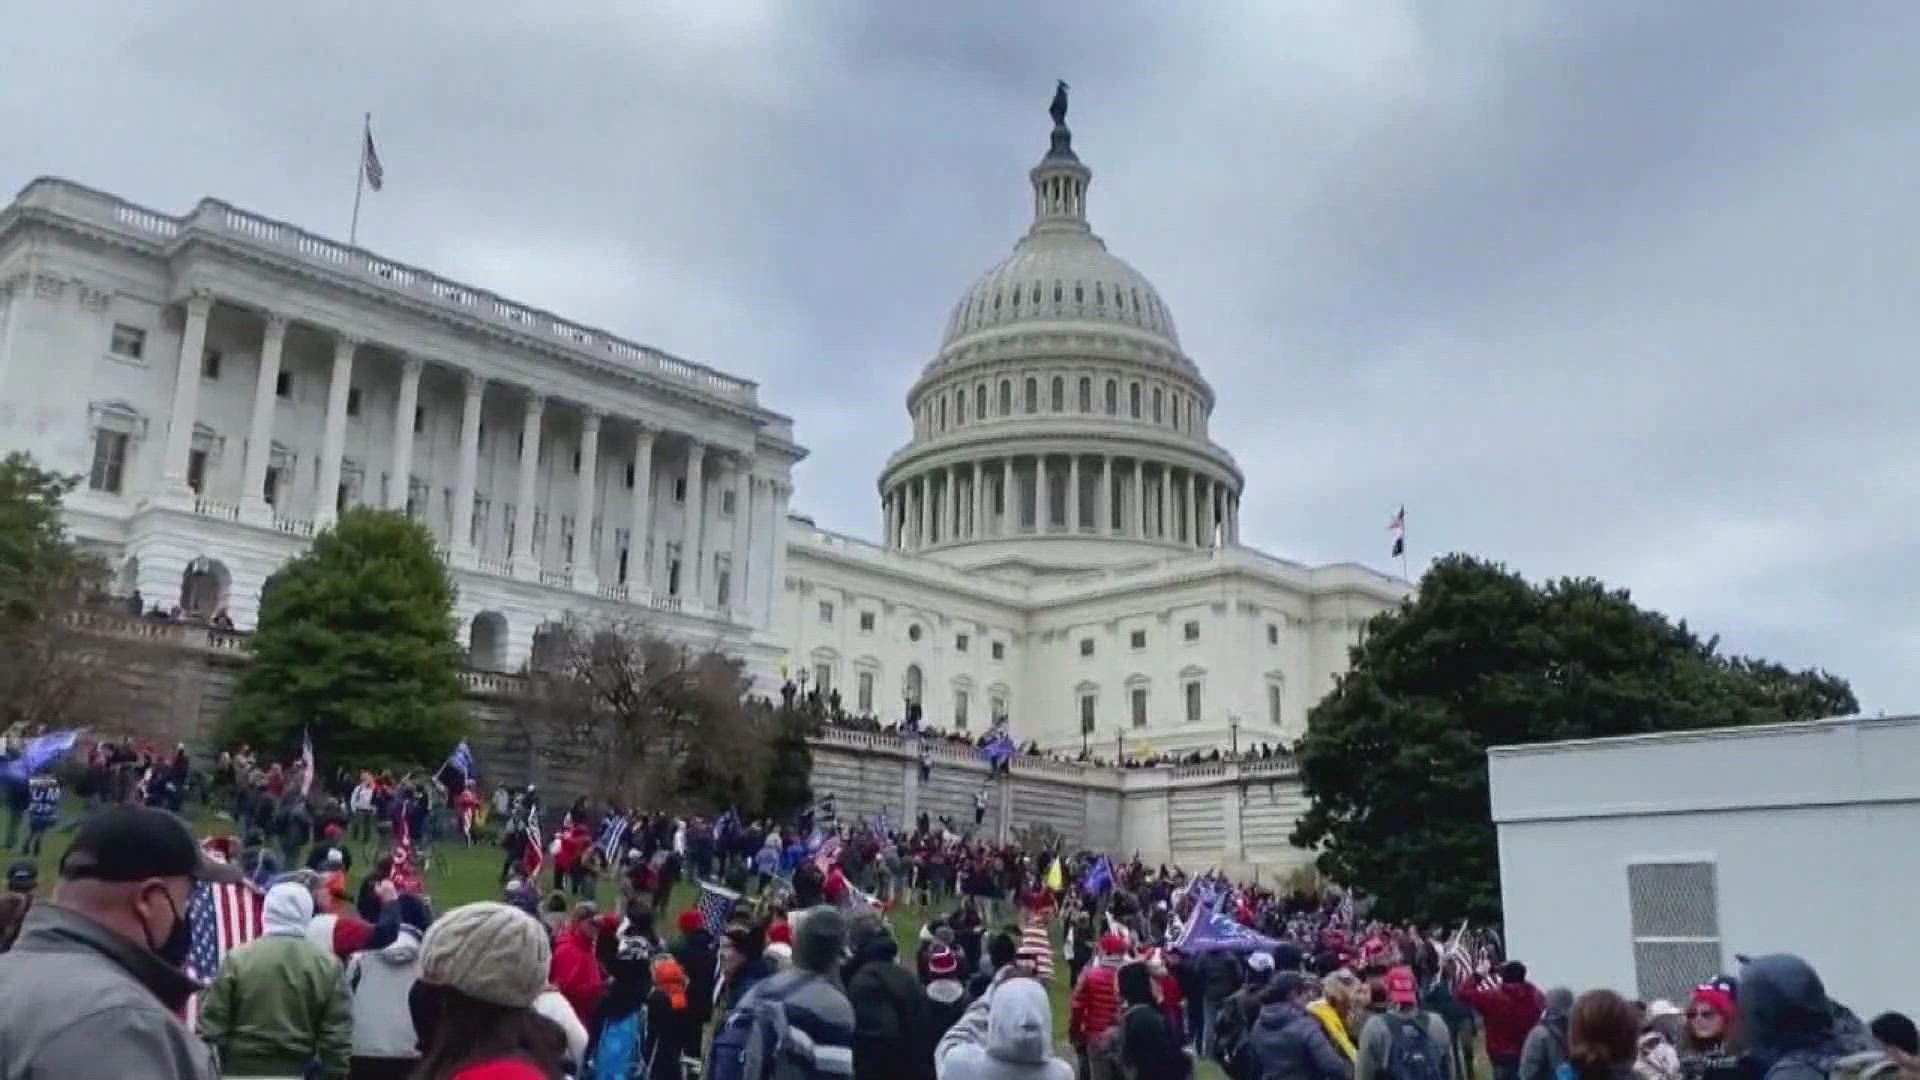 Though it's been two years since the Jan. 6 storming of the Capitol, experts say we're still feeling the impact in politics and daily life